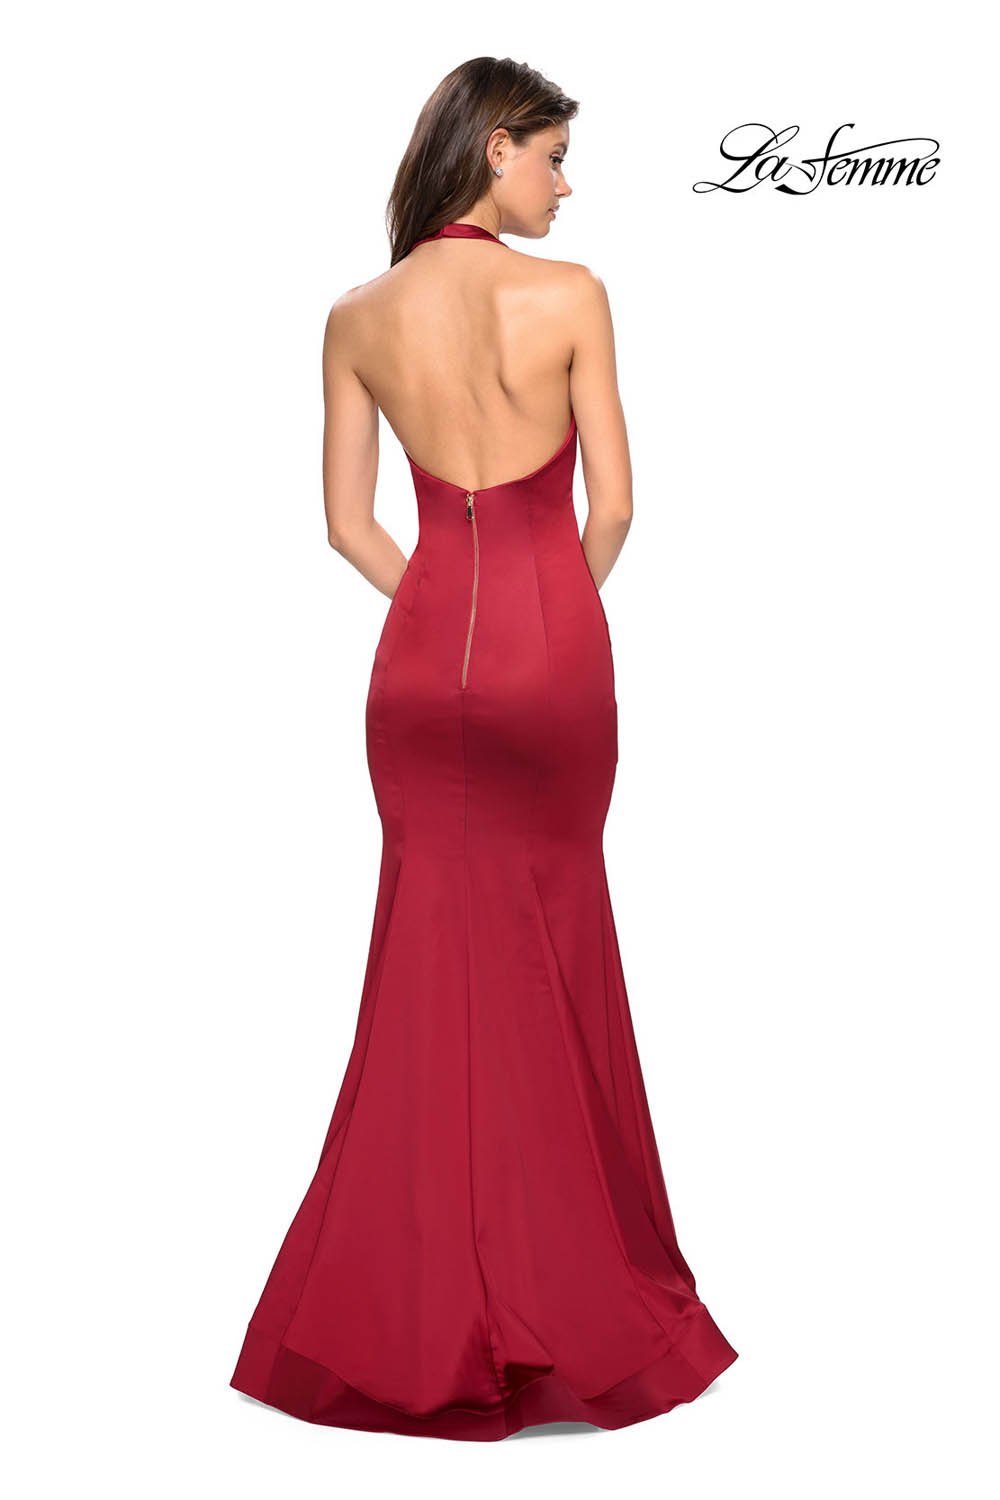 La Femme 27653 dress images in these colors: Black, Emerald, Red.